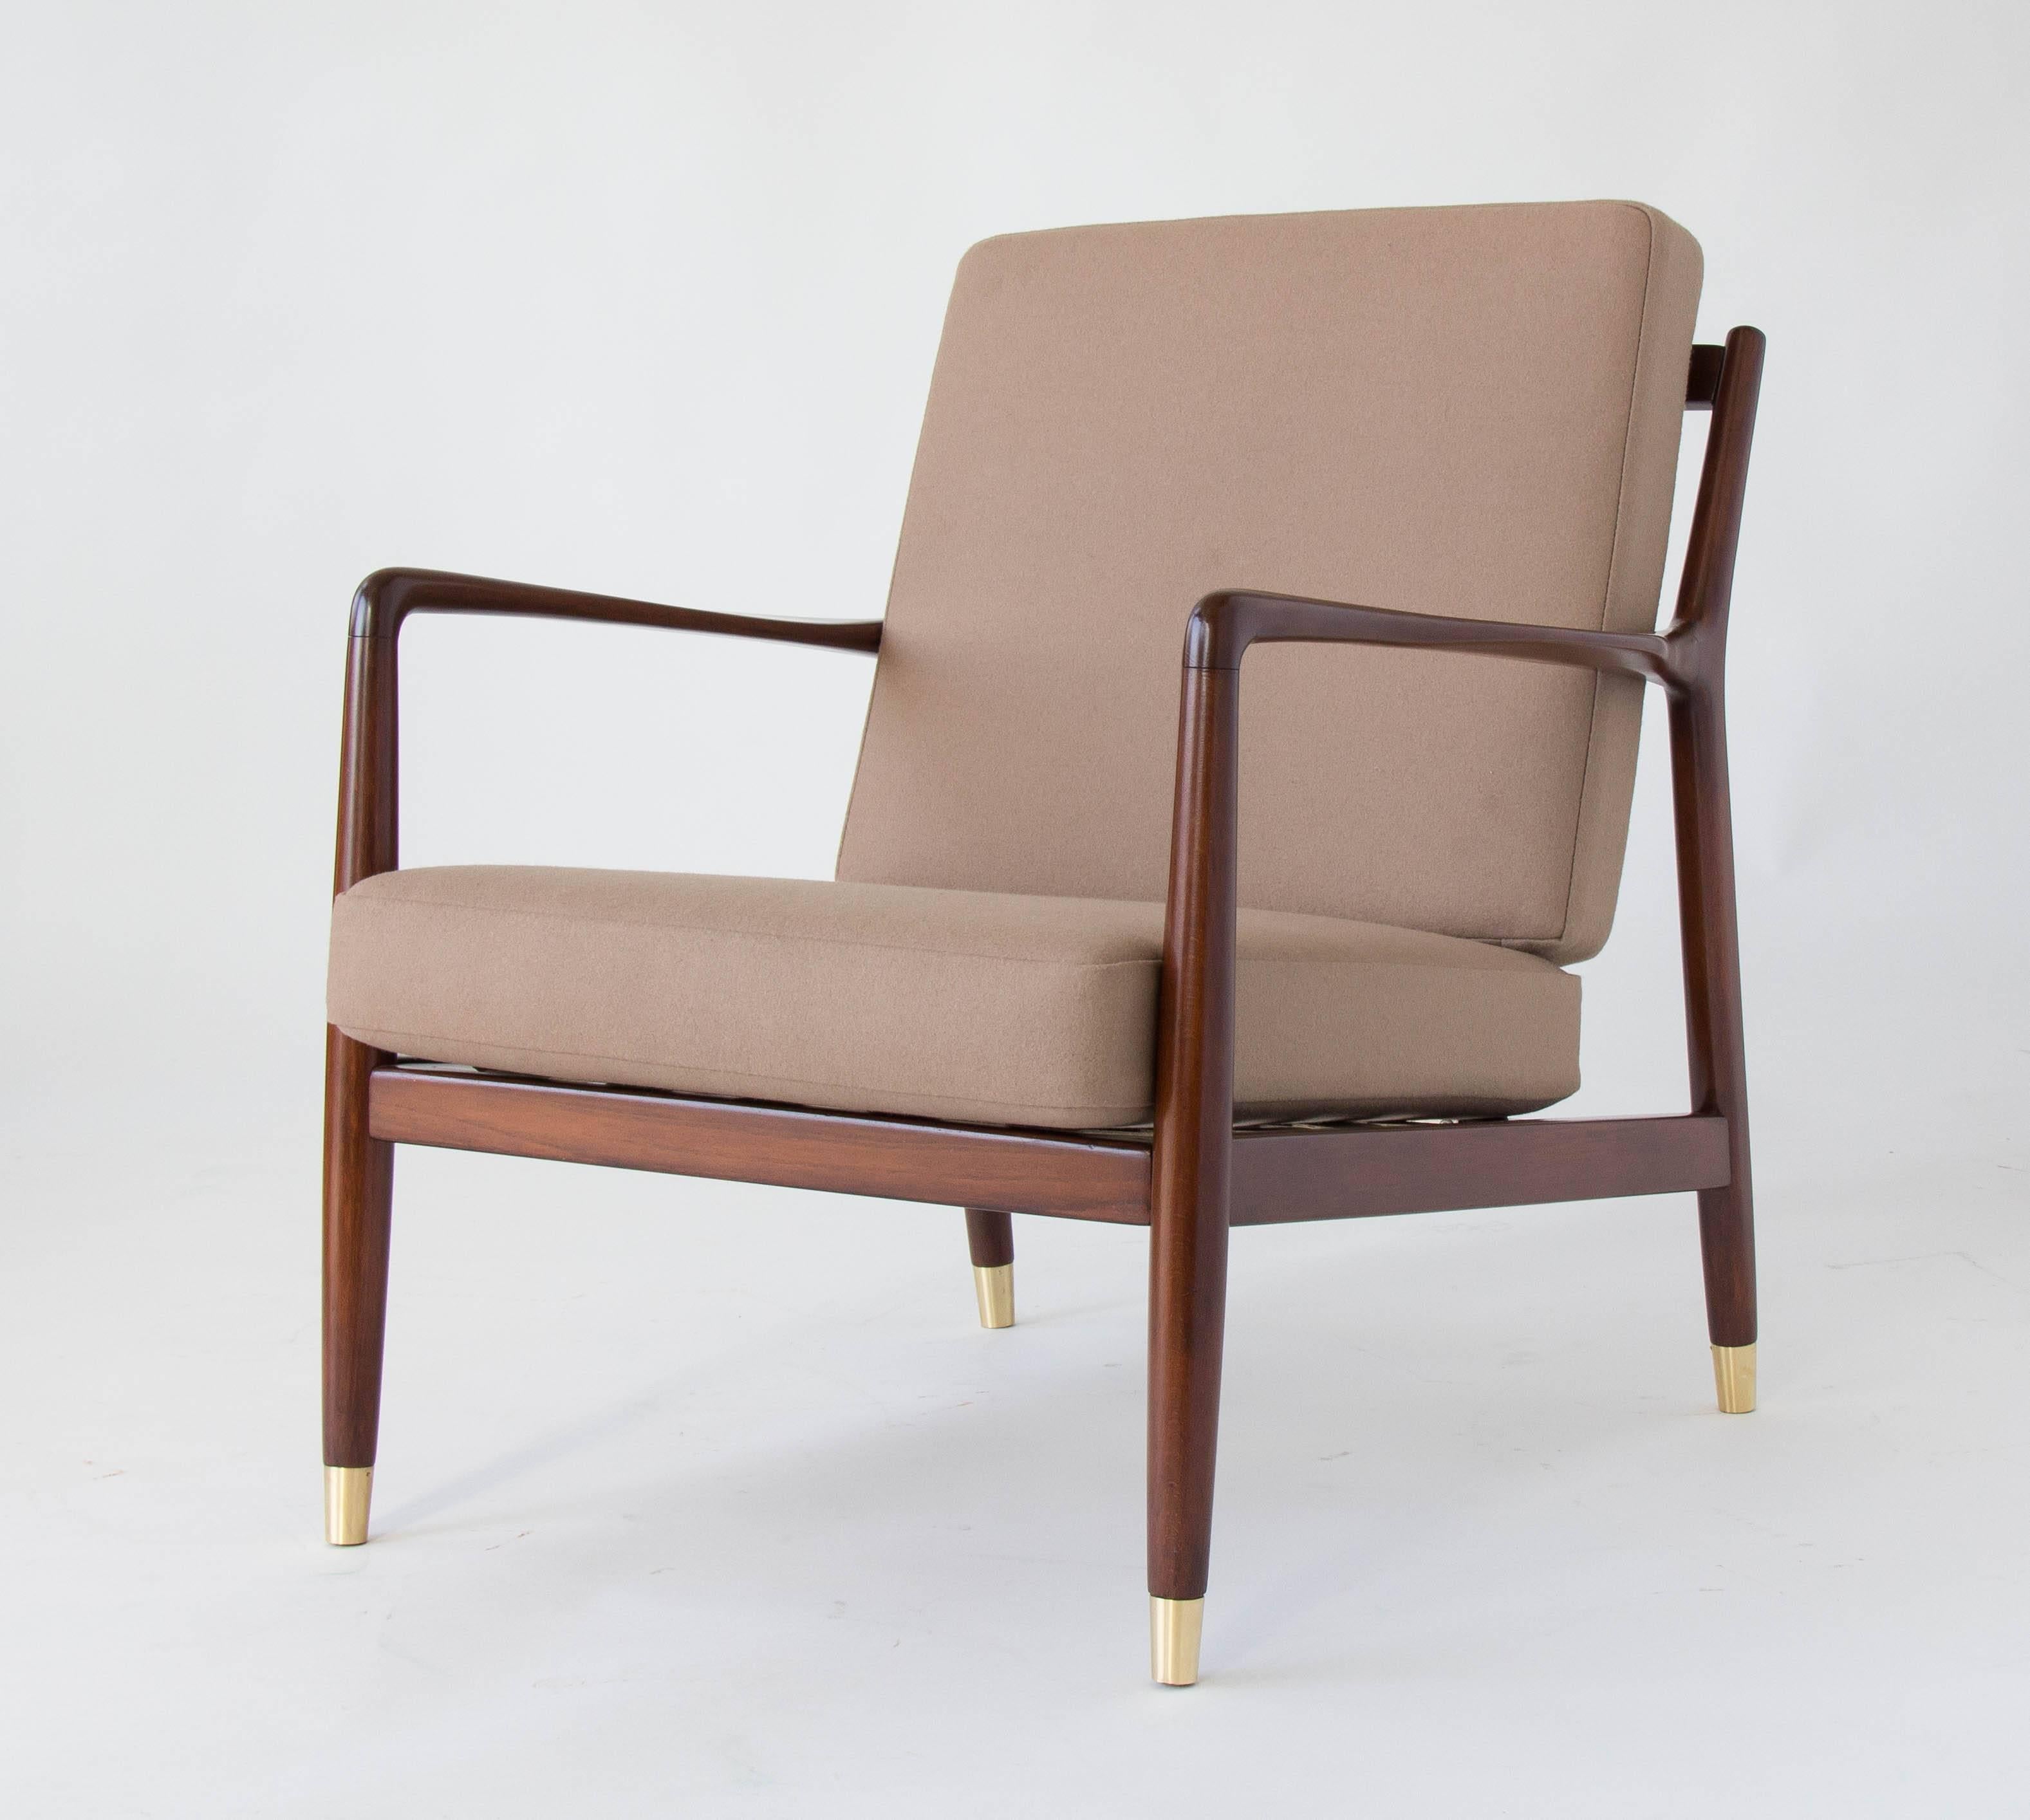 Pair of Lounge Chairs with Brass-Capped Legs by Folke Ohlsson for DUX (20. Jahrhundert)